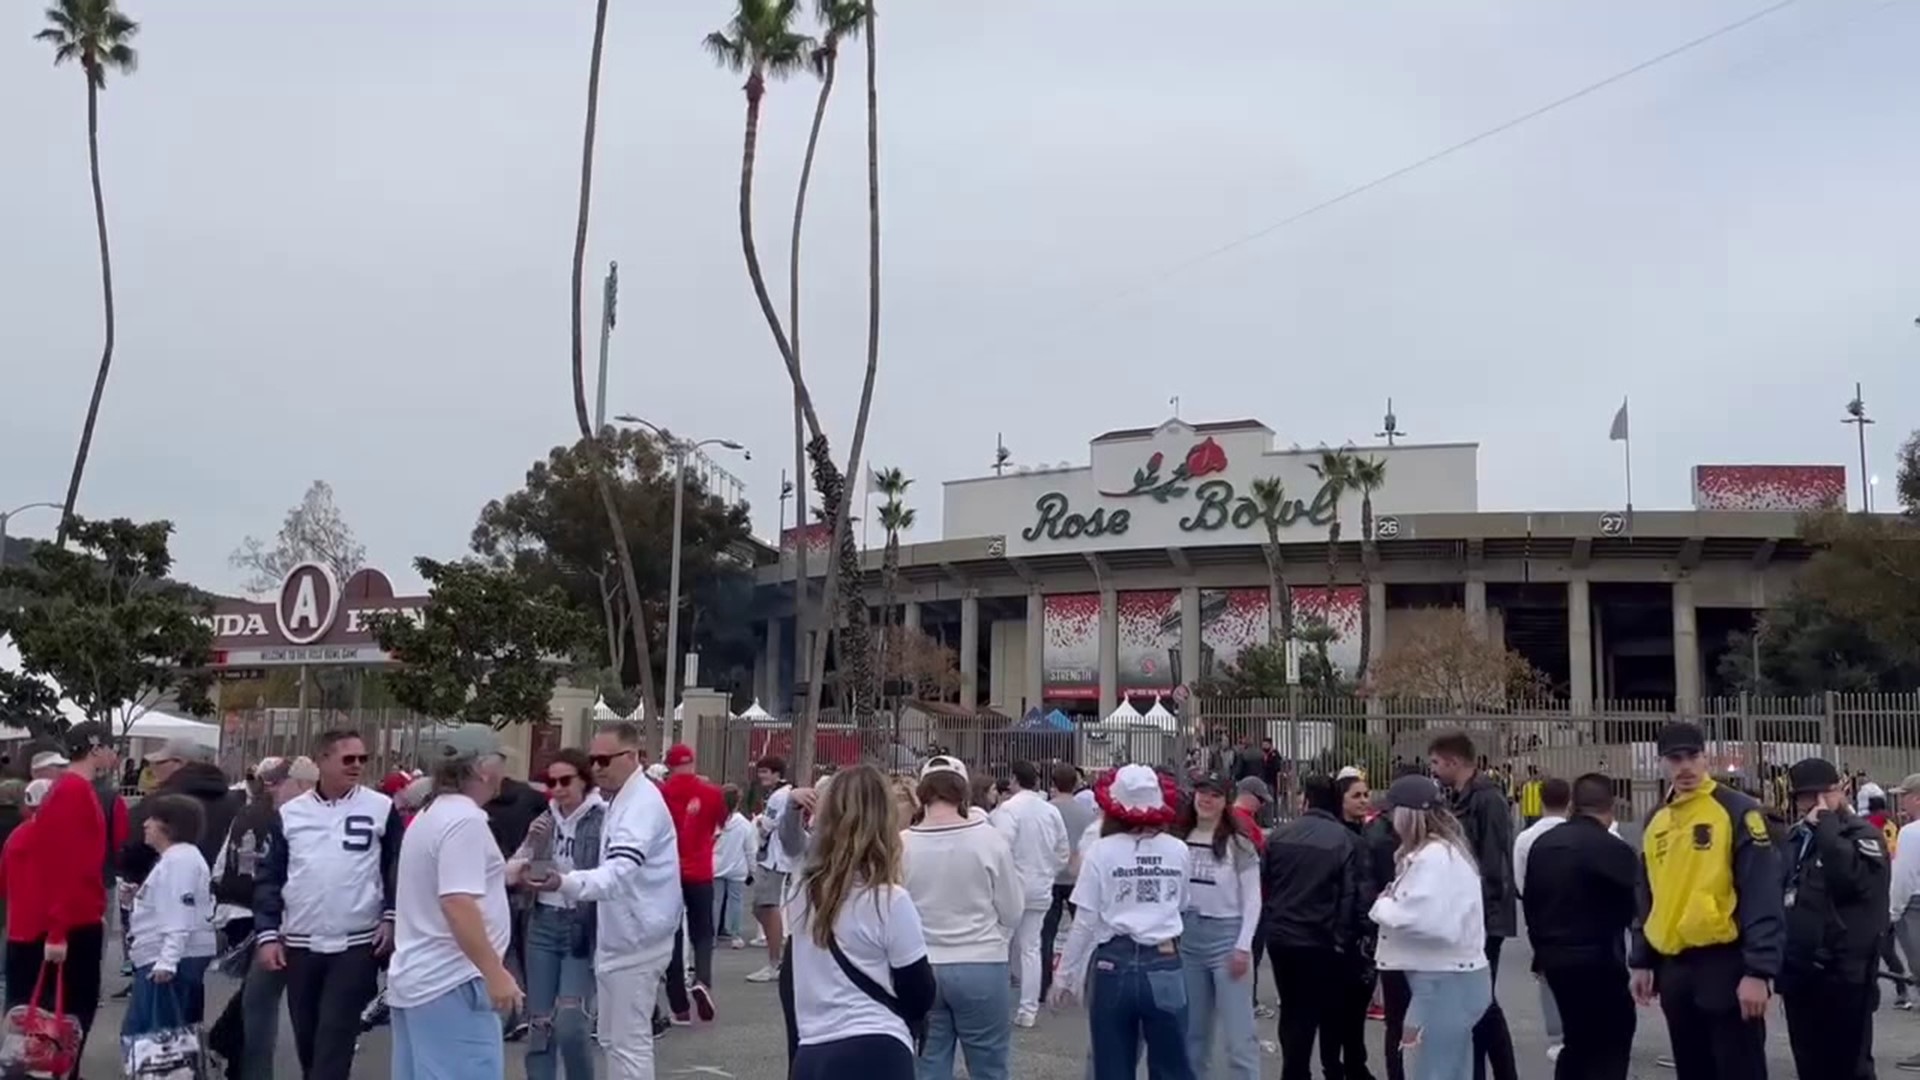 The 109th Rose Bowl is underway, and Newswatch 16's Chris Keating caught up with Penn State fans from our area who are attending the game.